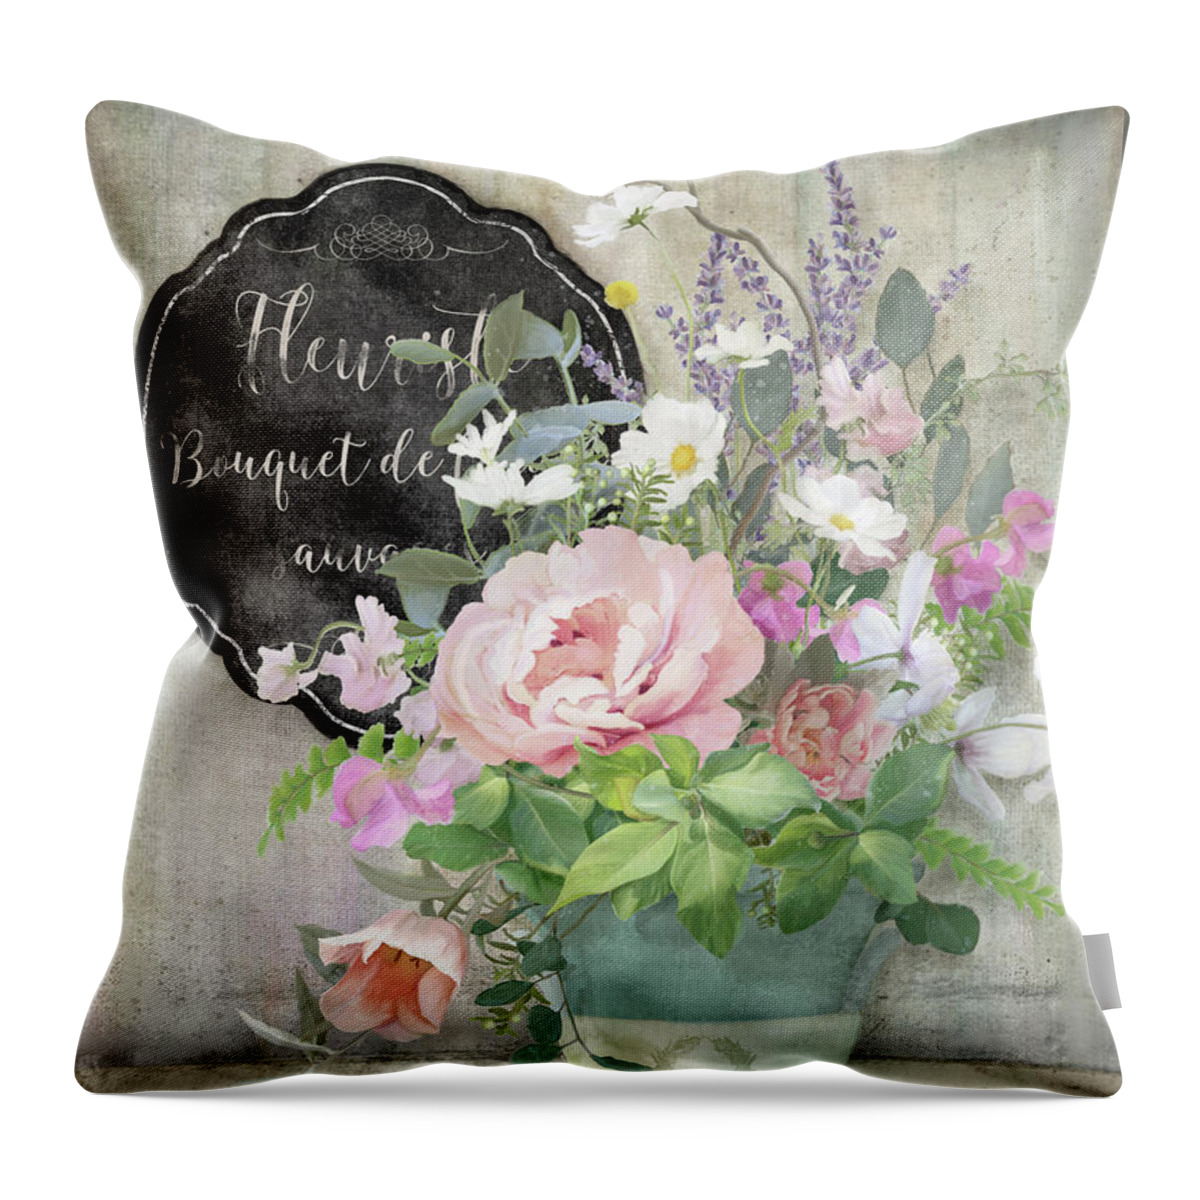 Marche Aux Fleurs Throw Pillow featuring the painting Marche aux Fleurs 3 Peony Tulips Sweet Peas Lavender and Bird by Audrey Jeanne Roberts